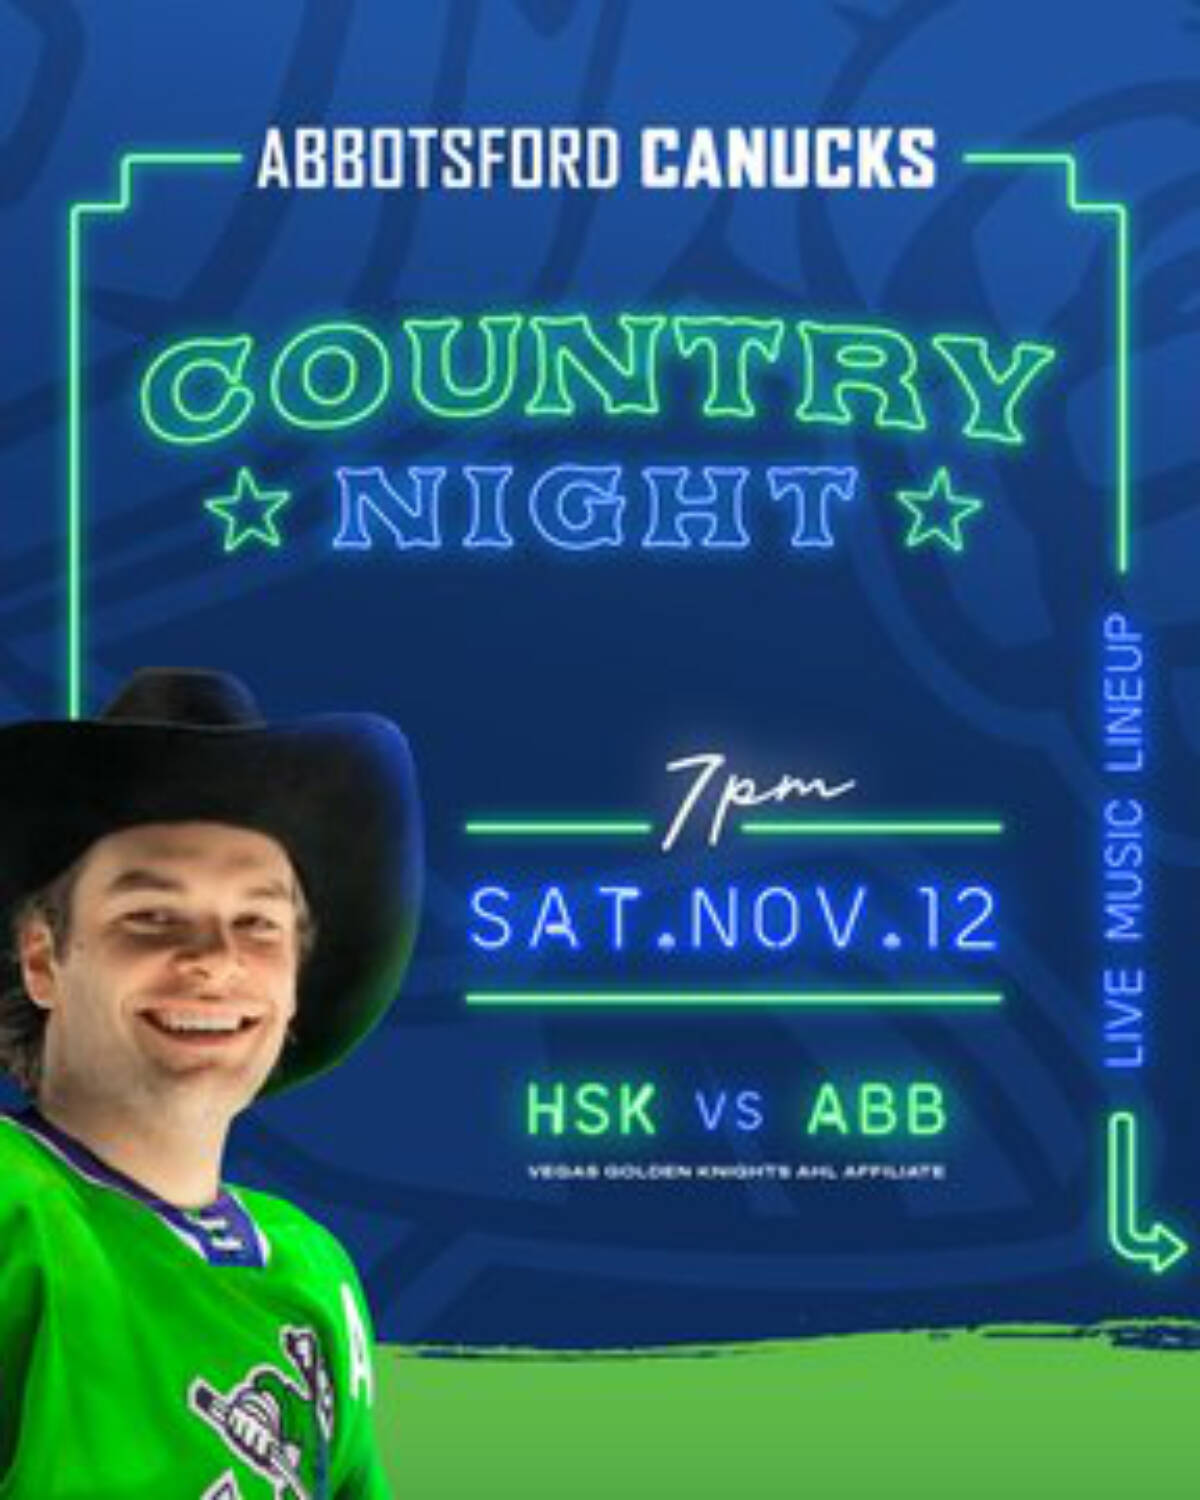 Live music, $5 beers and player autographs scheduled for Abbotsford Canucks “Country Night”